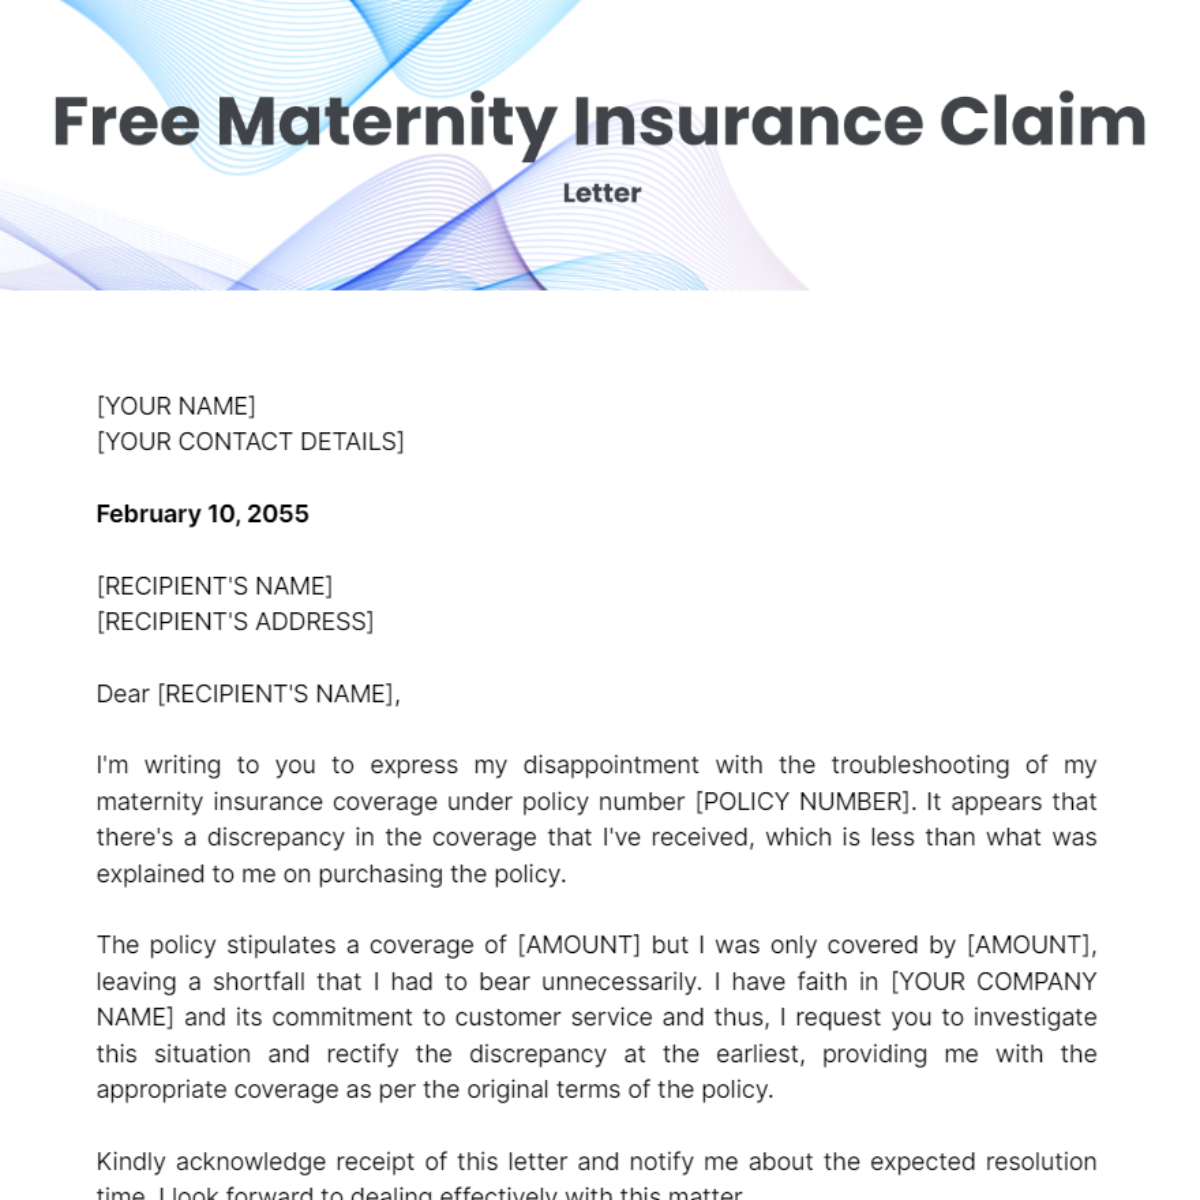 Maternity Insurance Claim Letter Template - Edit Online & Download